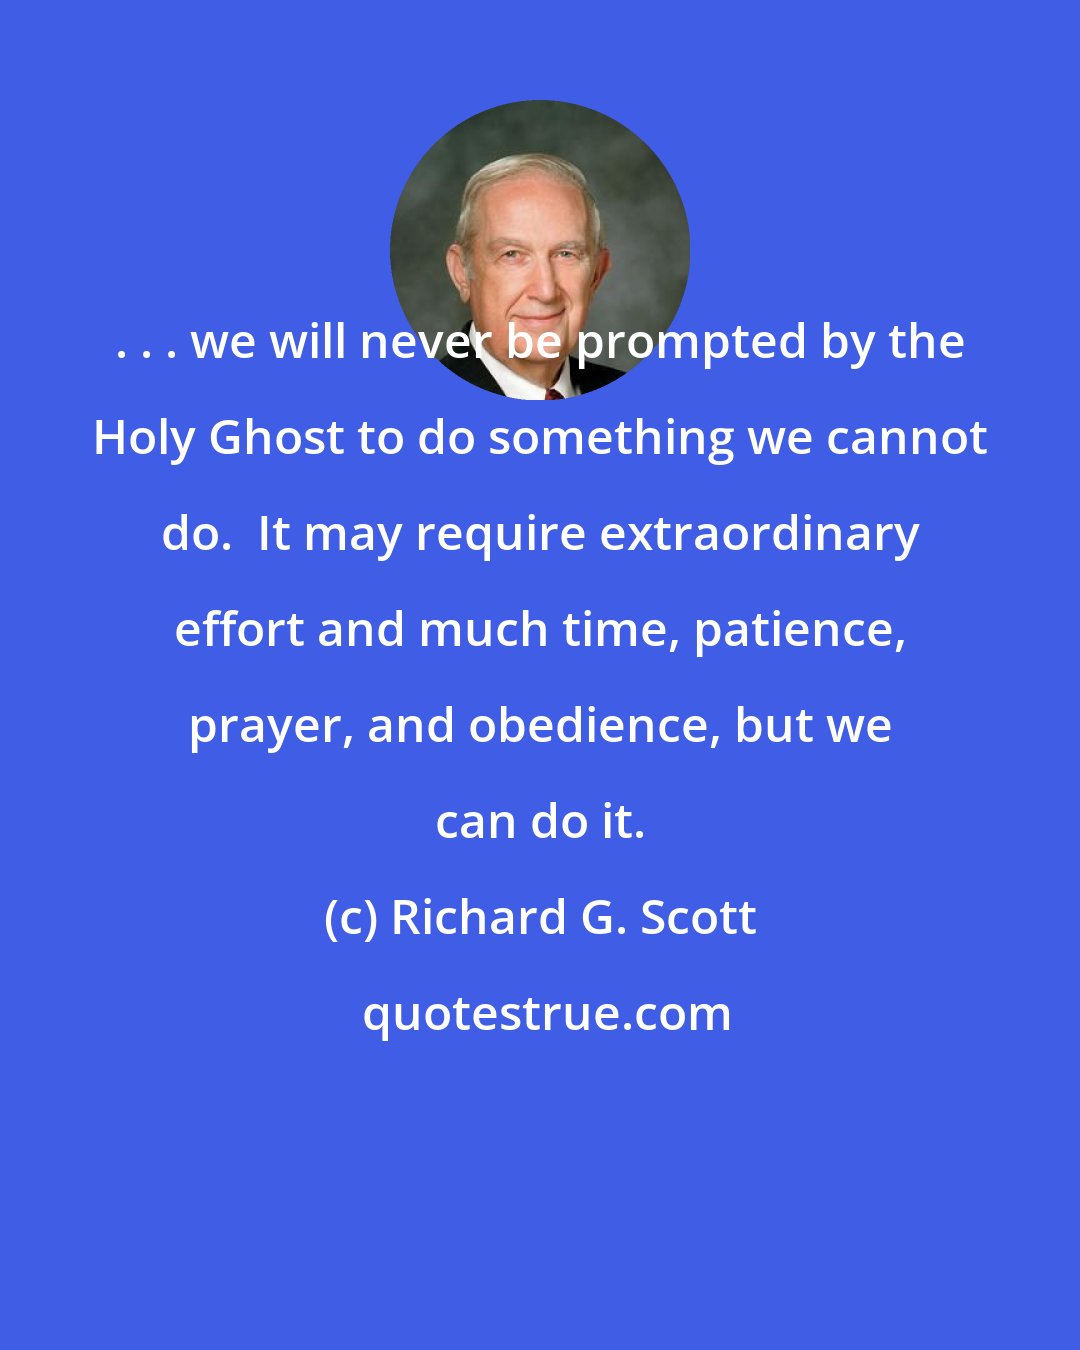 Richard G. Scott: . . . we will never be prompted by the Holy Ghost to do something we cannot do.  It may require extraordinary effort and much time, patience, prayer, and obedience, but we can do it.